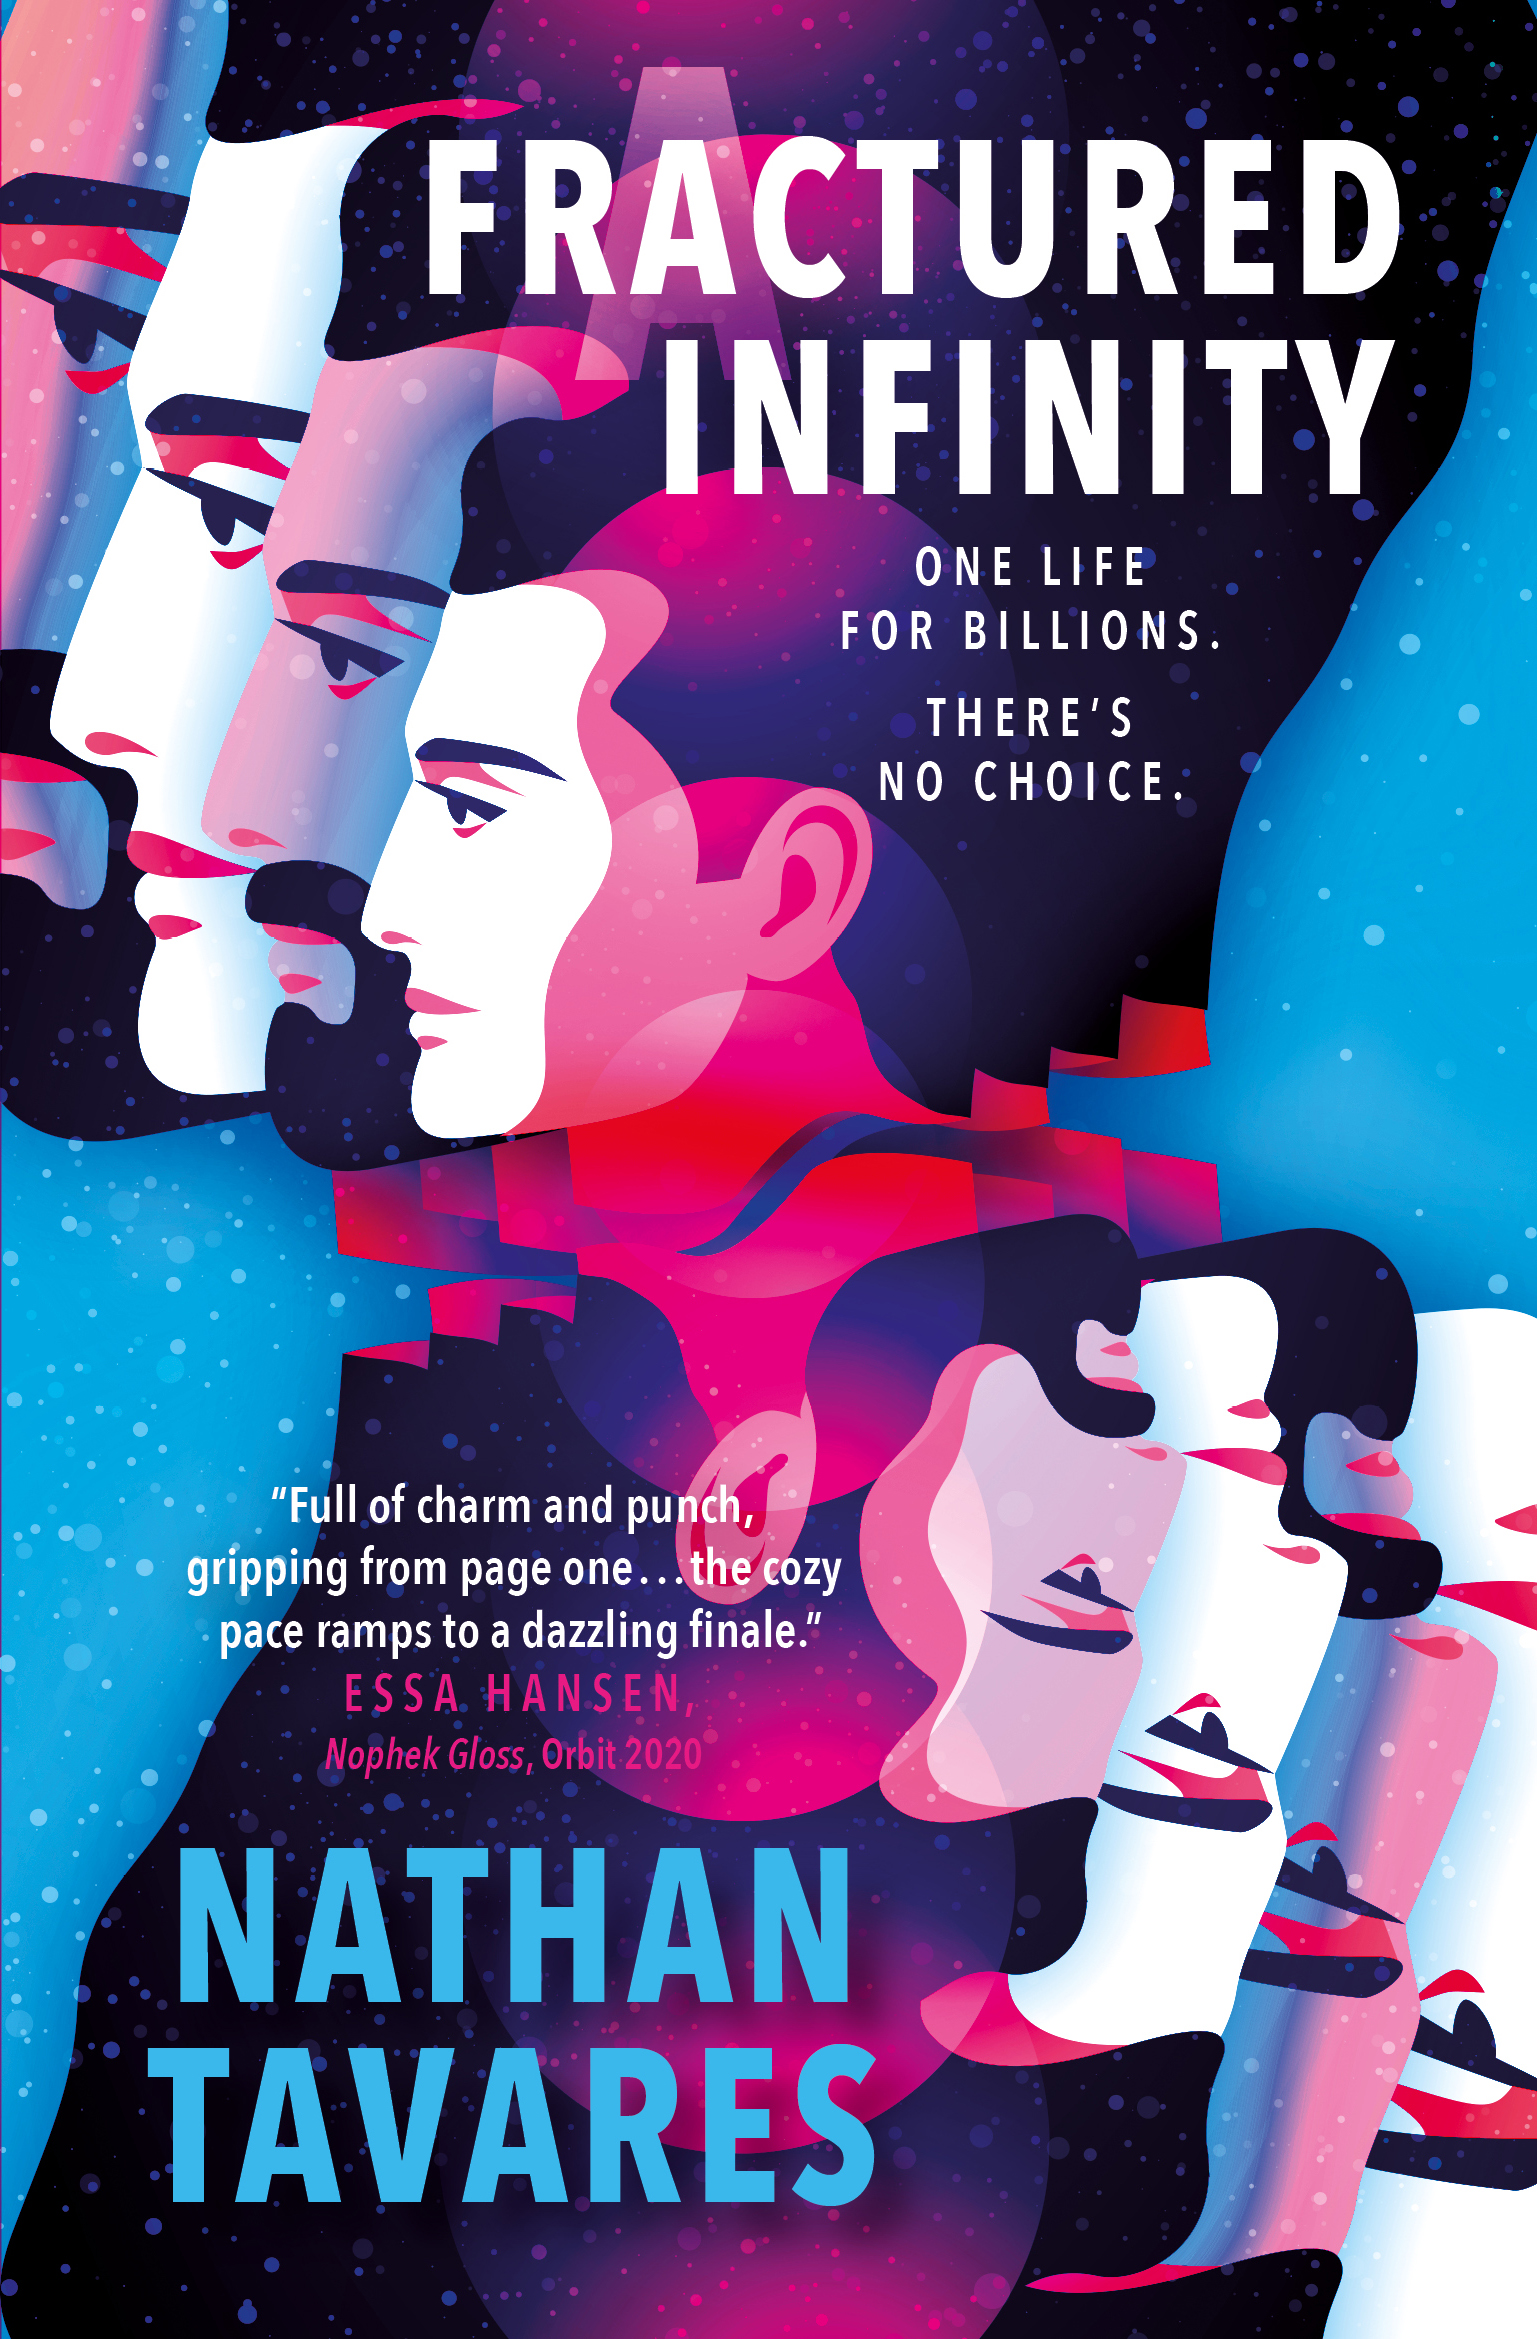 A Fractured Infinity book cover. Illustration of a man repeated and turned upside down